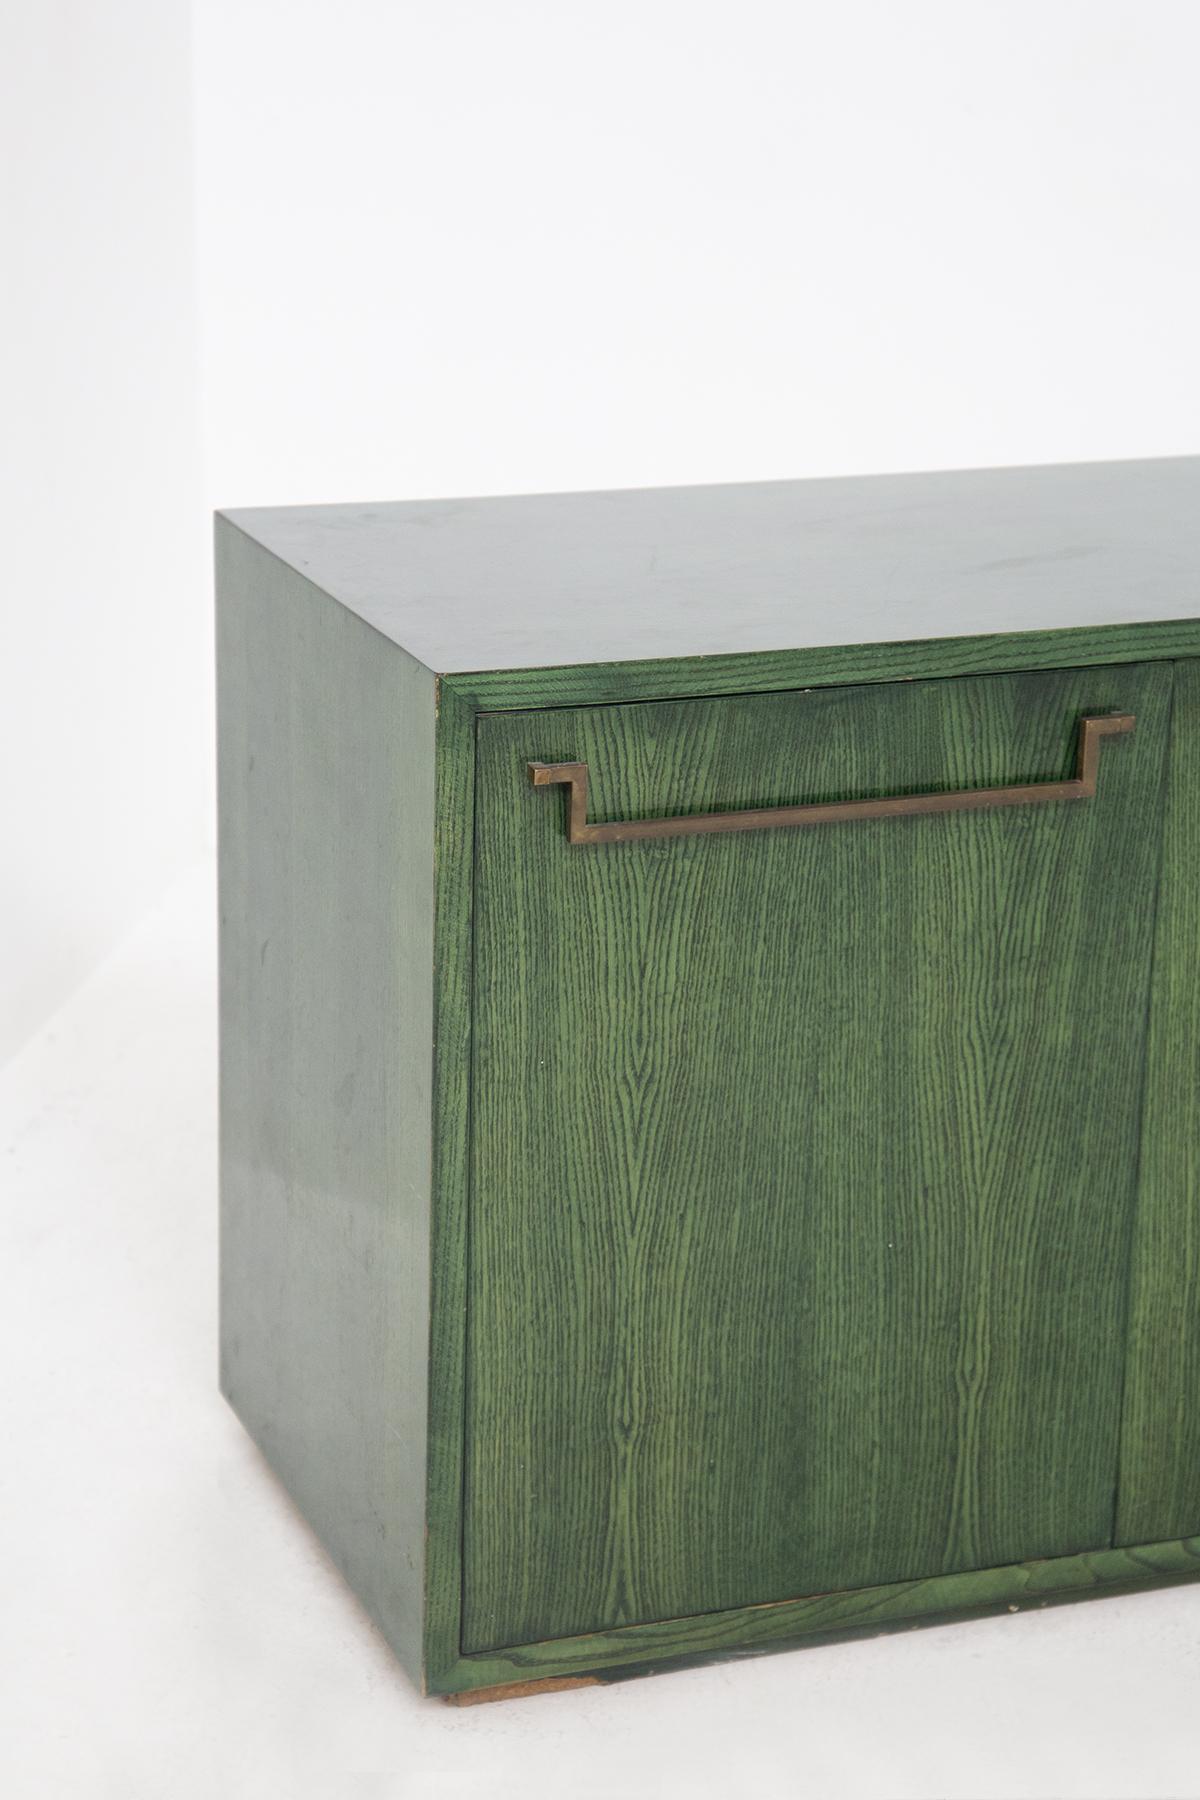 Gorgeous green painted wood sideboard by Vivai del Sud, fine Italian manufacture, from the 1970s.
The vintage sideboard is quite long with a rectangular shape and includes 4 front doors, of equal size. Each door is April through an elongated brass